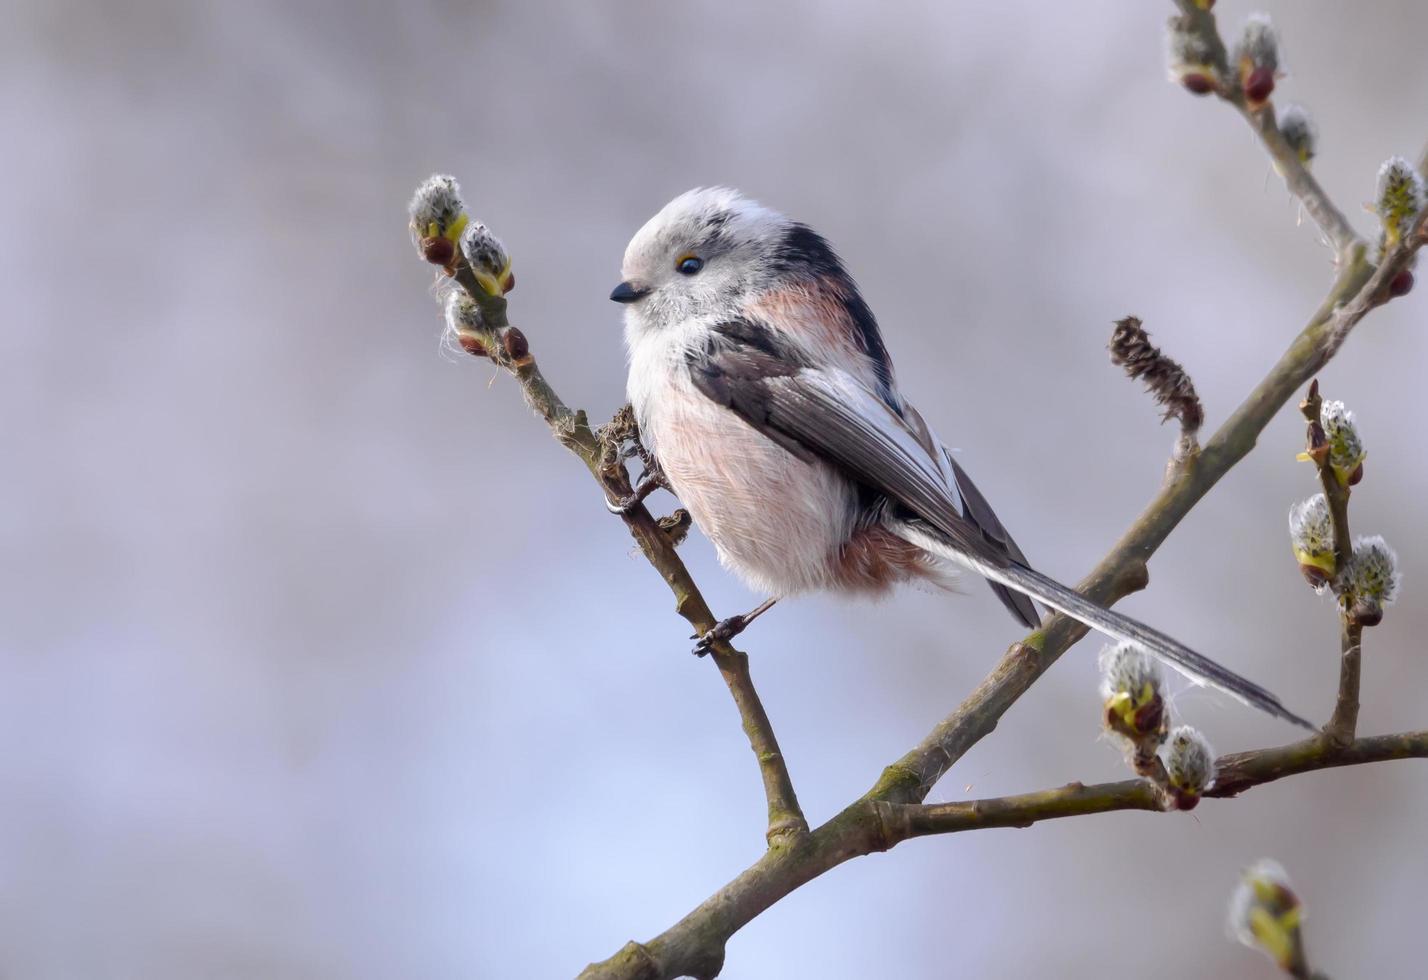 Long-tailed Tit - Aegithalos caudatus - perched on flowering willow bush branch in early spring season photo